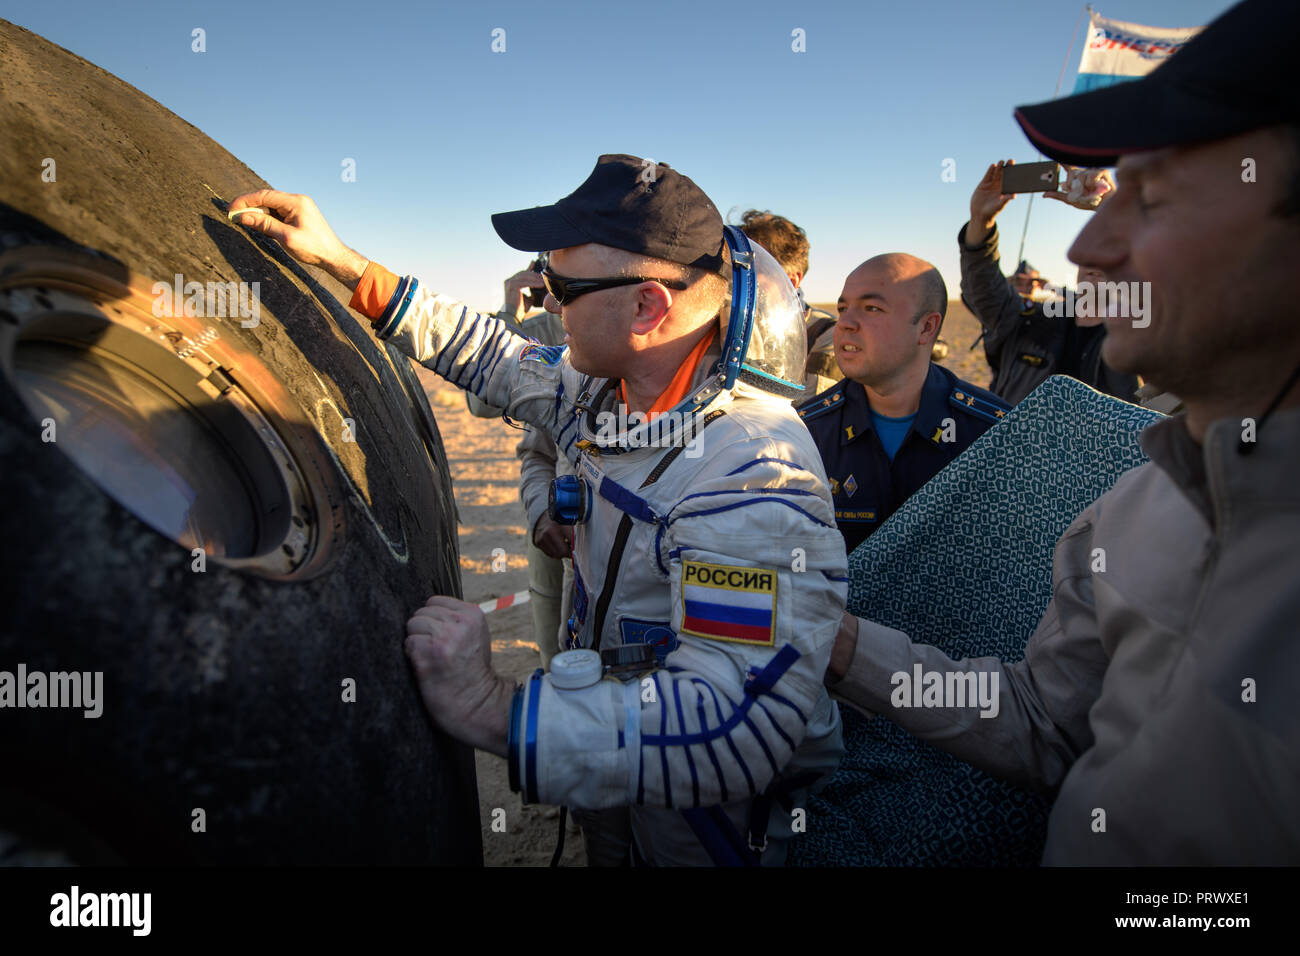 Zhezkazgan, Kazakhstan. 4th October, 2018. International Space Station Expedition 56 Soyuz Commander Oleg Artemyev signs the exterior of the Russian Soyuz MS-08 capsule after returning safely October 4, 2018 near Zhezkazgan, Kazakhstan. Oleg Artemyev along with astronauts Drew Feustel and Ricky Arnold of NASA,are returning after 197 days in space. Credit: Planetpix/Alamy Live News Stock Photo